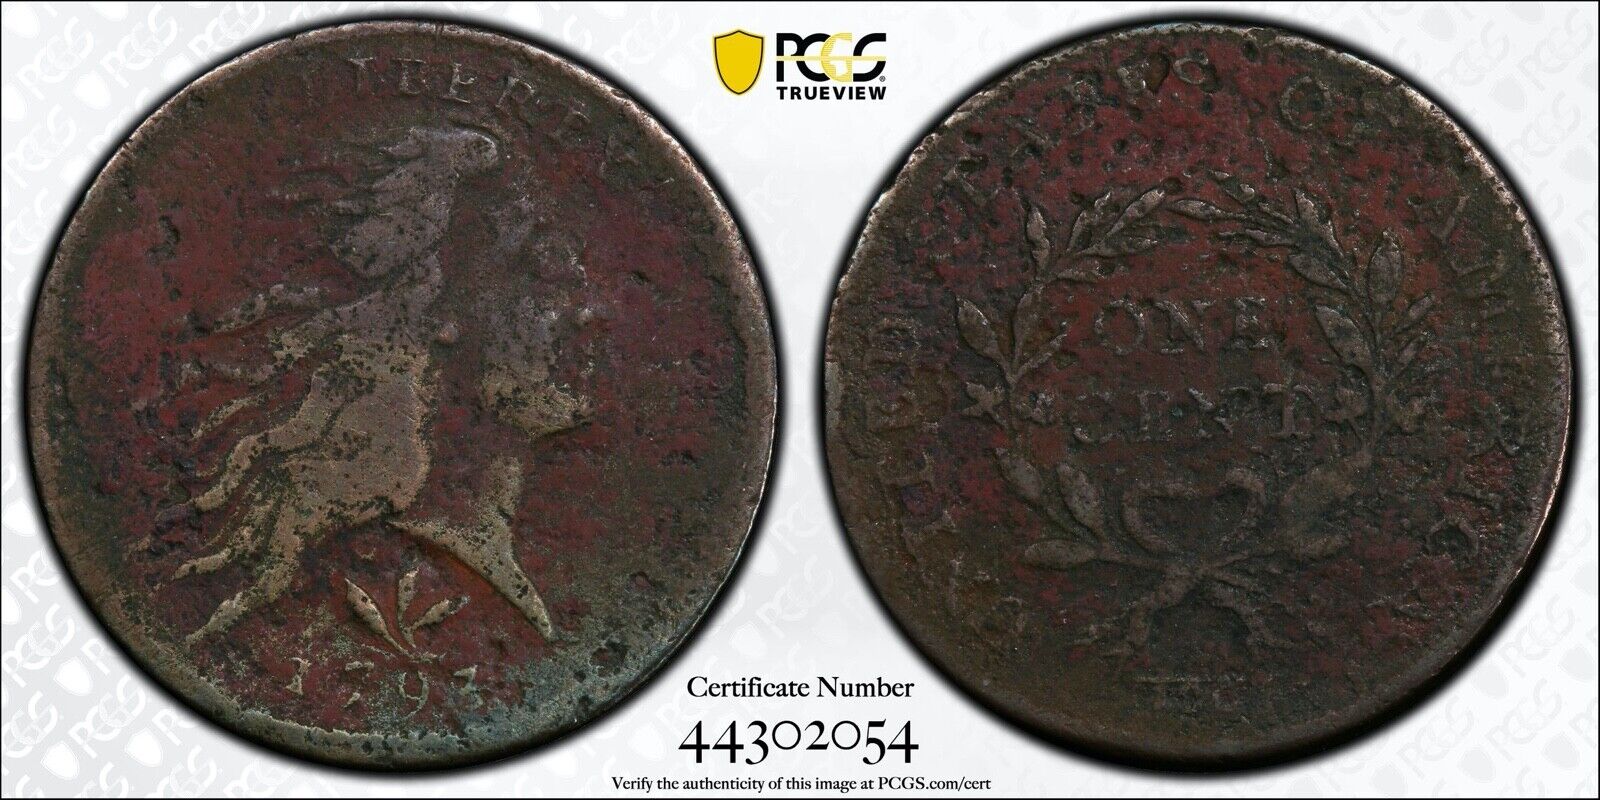 1793 S-9 Vine and Bars Edge Flowing Hair Copper Large Cent PCGS VF Detail